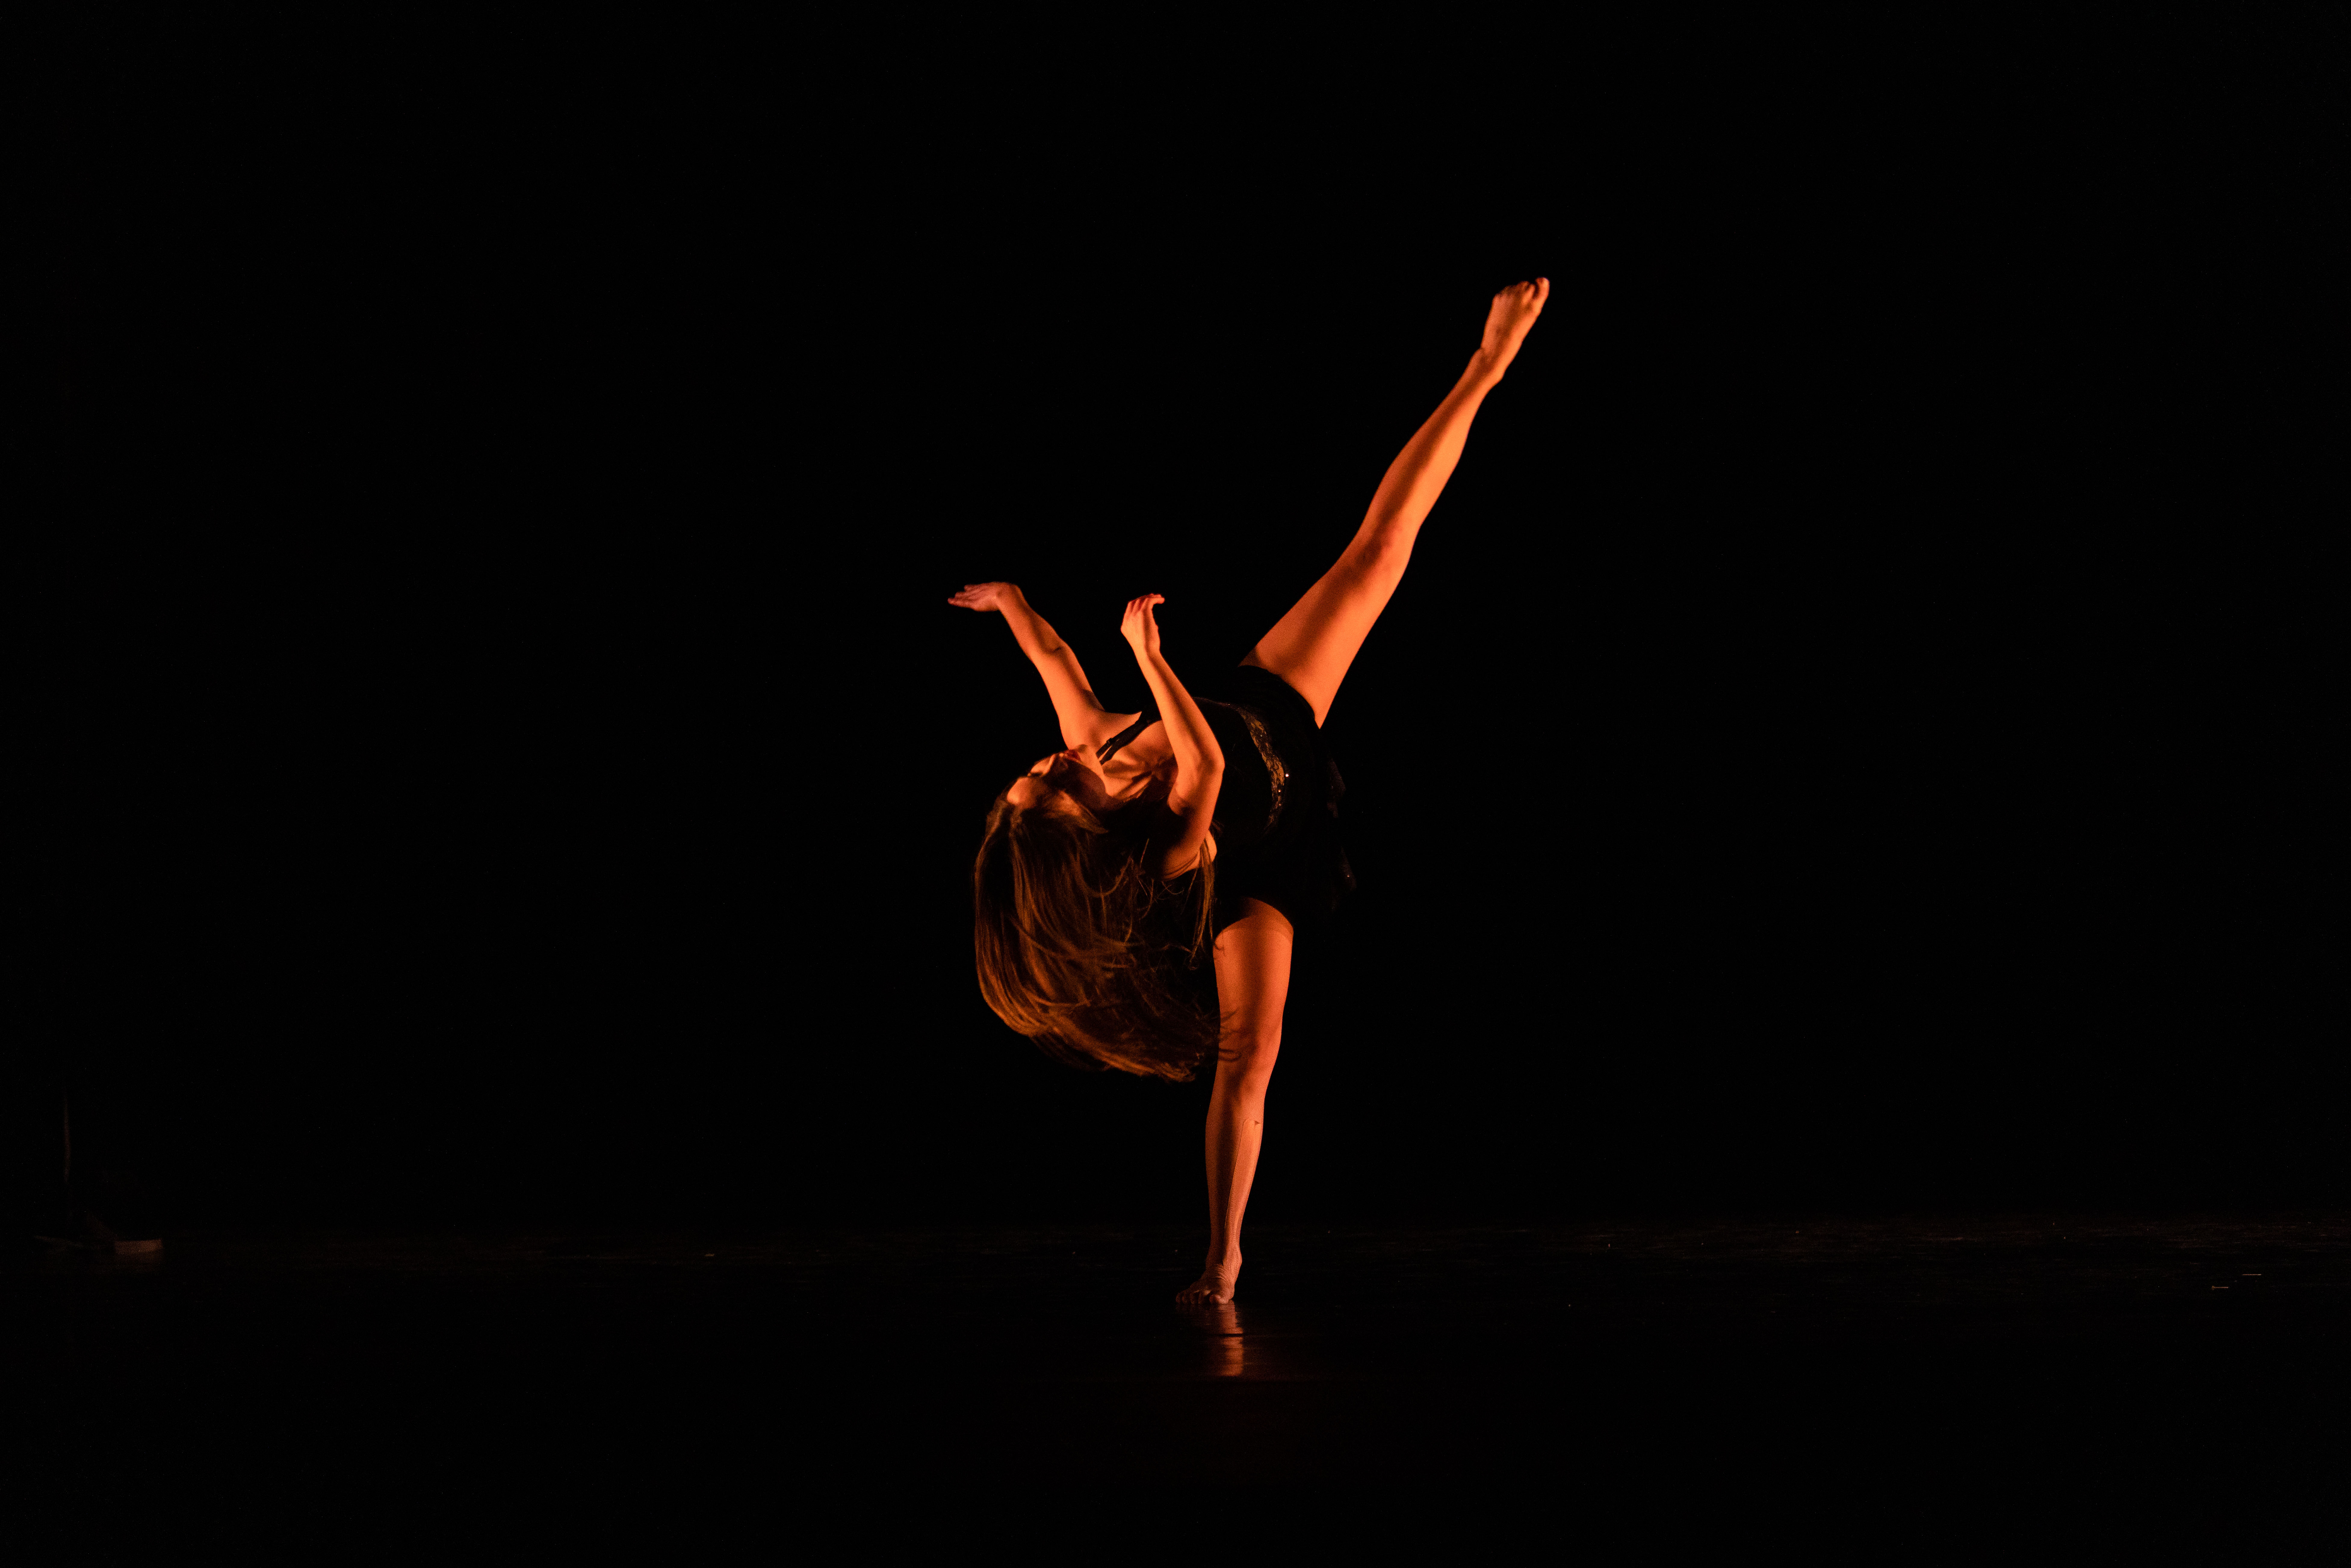 Solo dancer with leg extended perpendicular to the ground